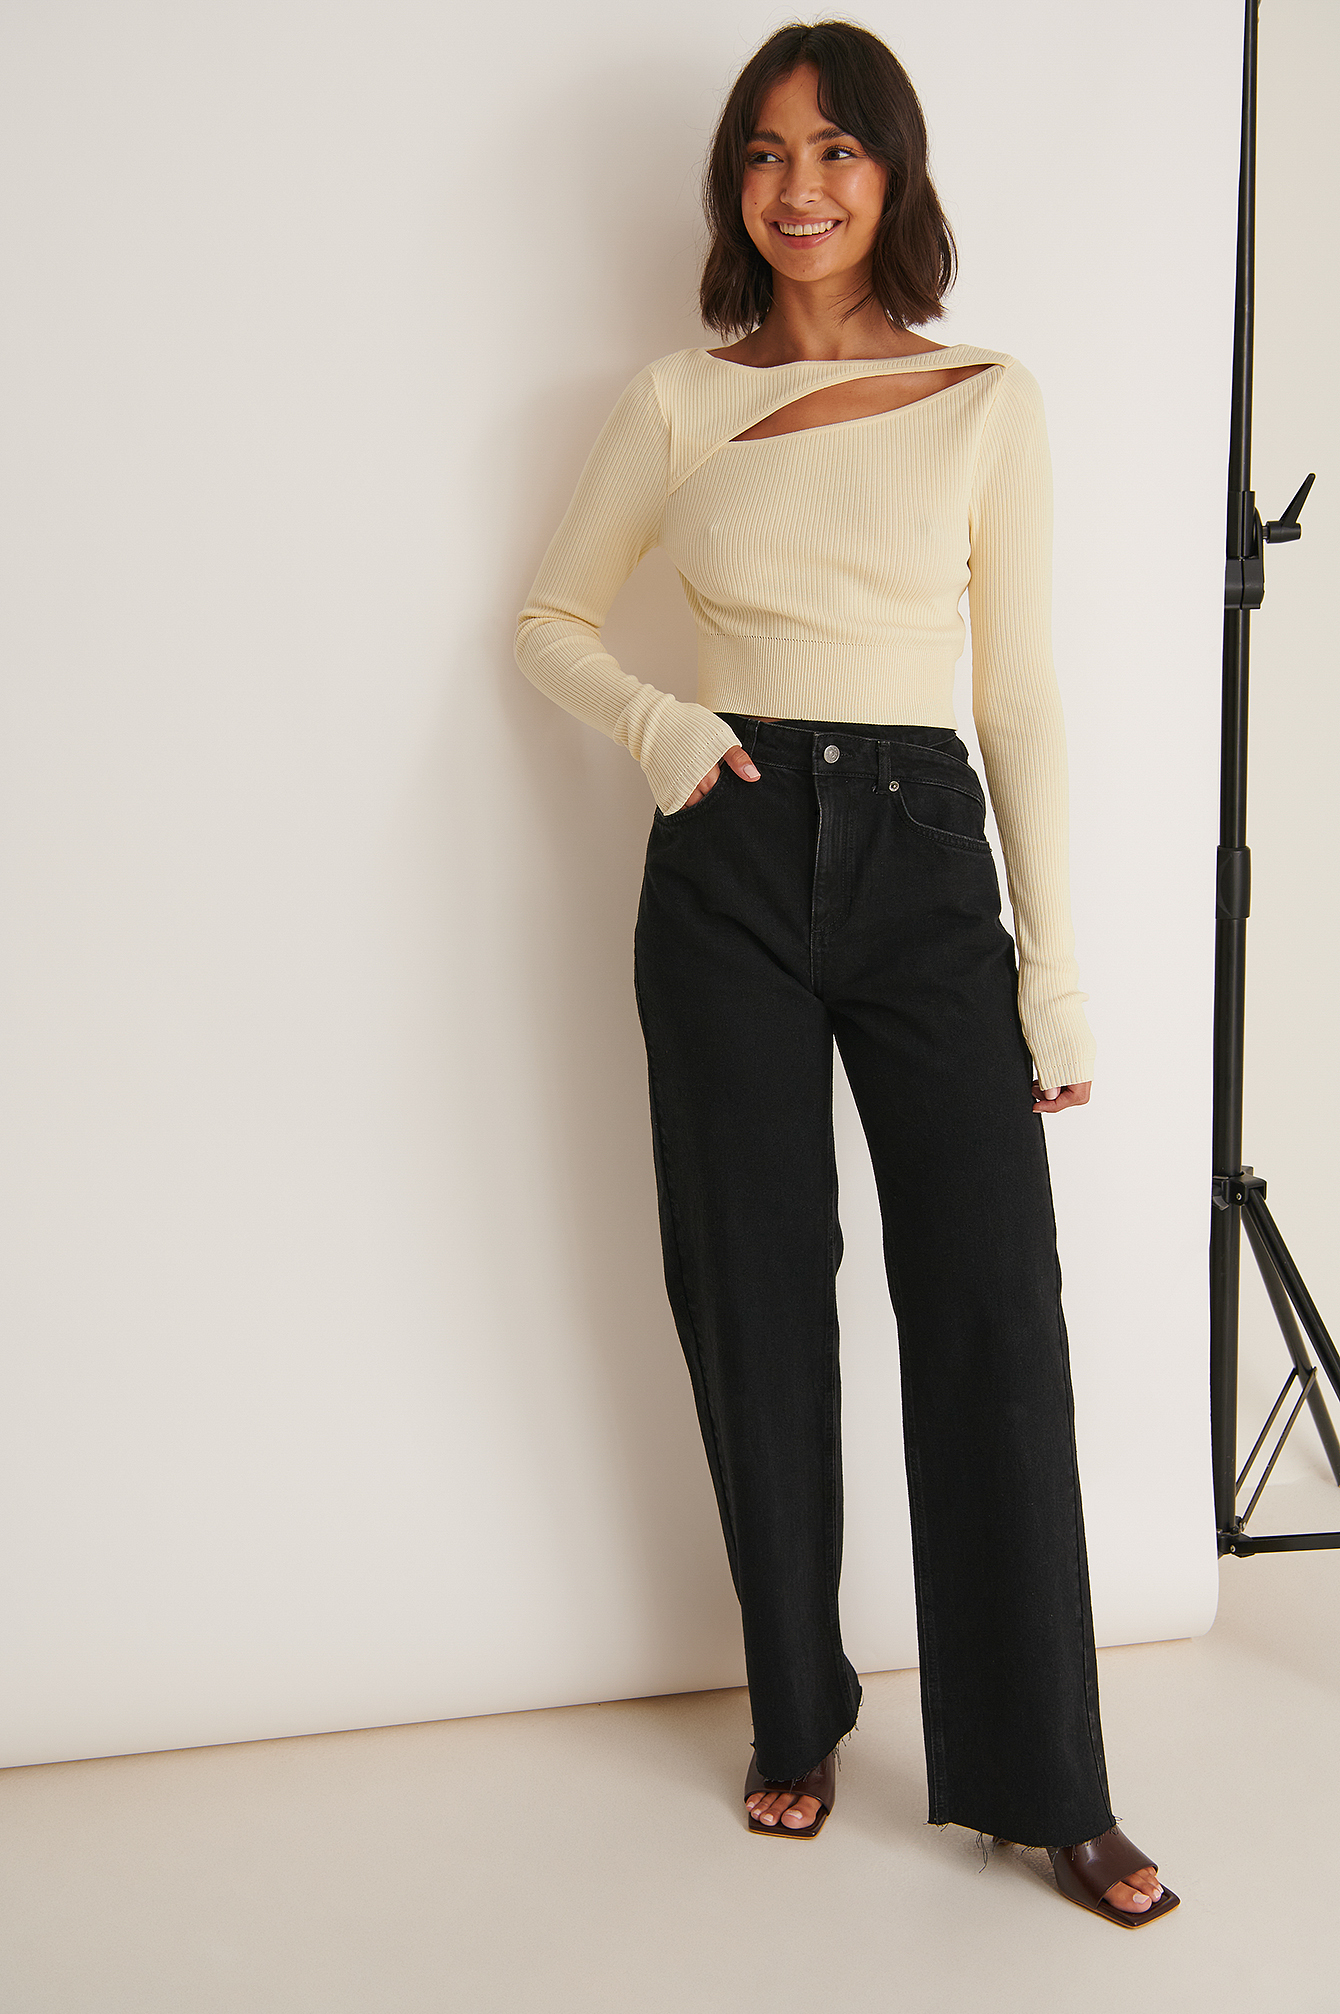 Front Cut Out Long Sleeve Top Outfit.